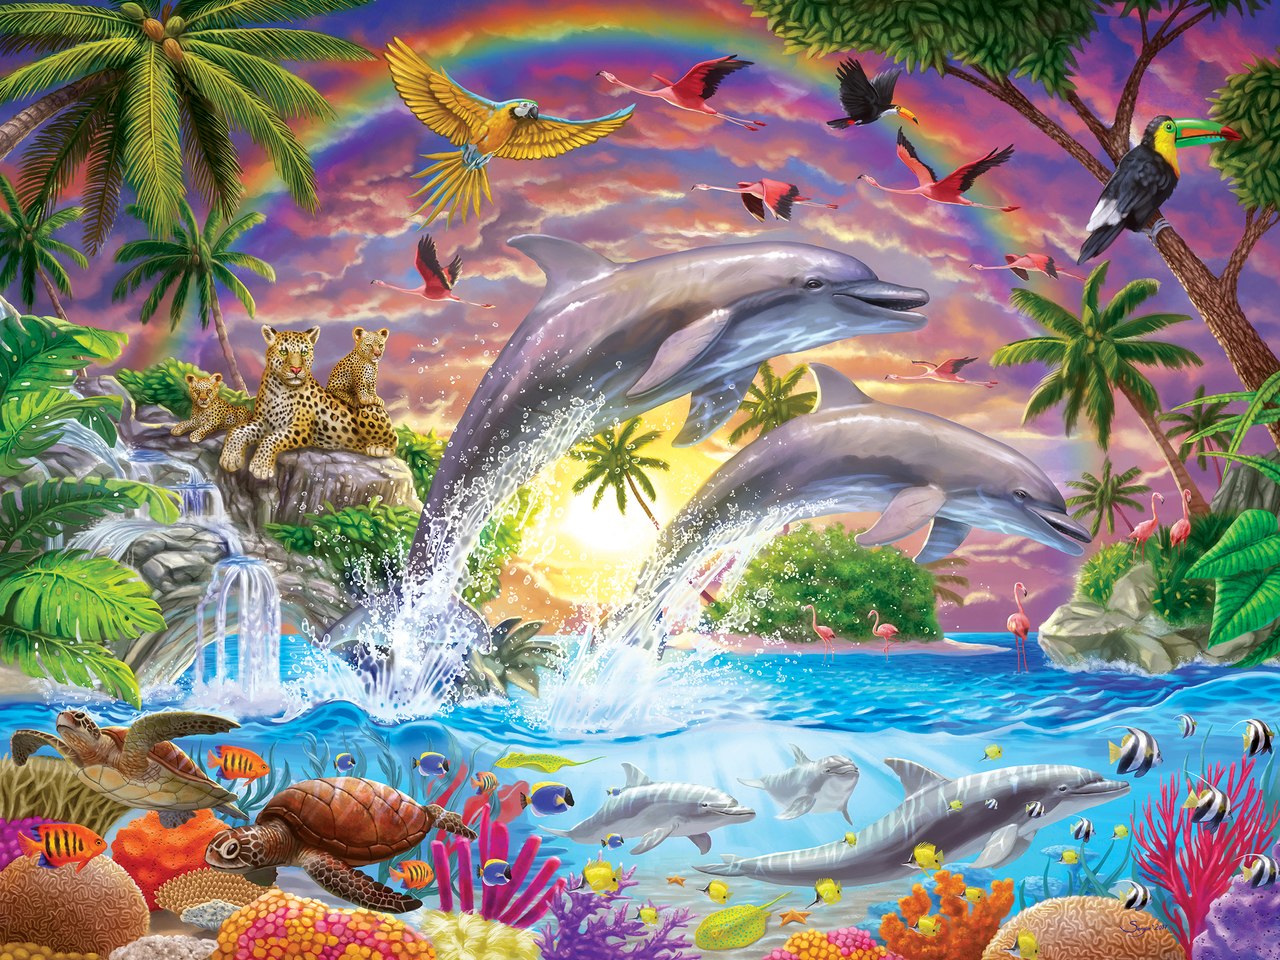 Fantasy Isle - 300pc EzGrip Jigsaw Puzzle by Masterpieces  			  					NEW